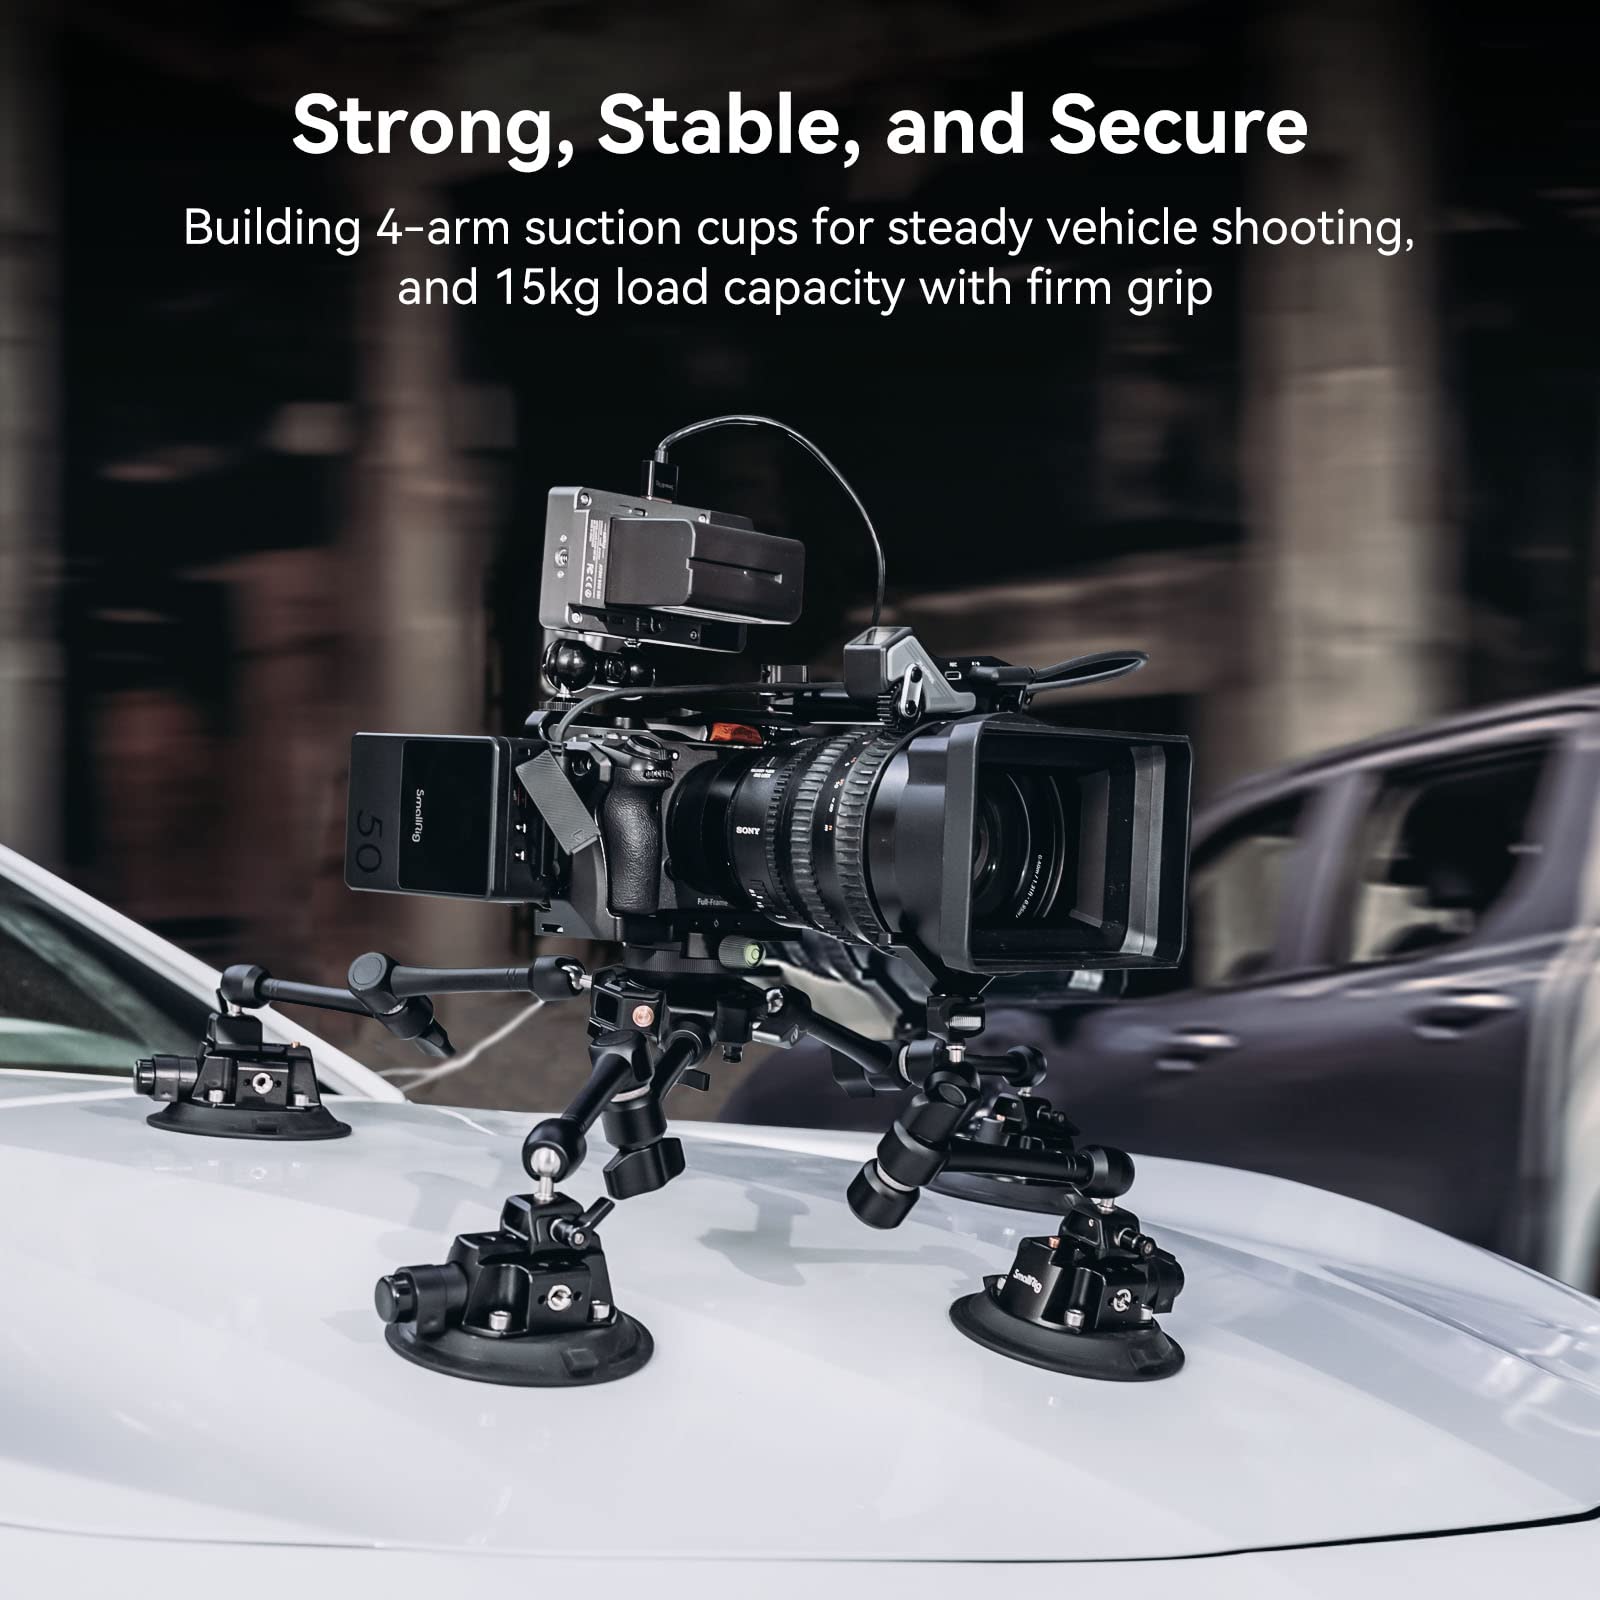 SmallRig Camera Suction Cup Mount, All-in-One 4-Arm Suction Cup Camera Car Mount, Adjustable Professional Gripper Car Mount Stabilizer, for Gopro for DSLR Camera, Camcorder, Vehicle Shooting - 3565